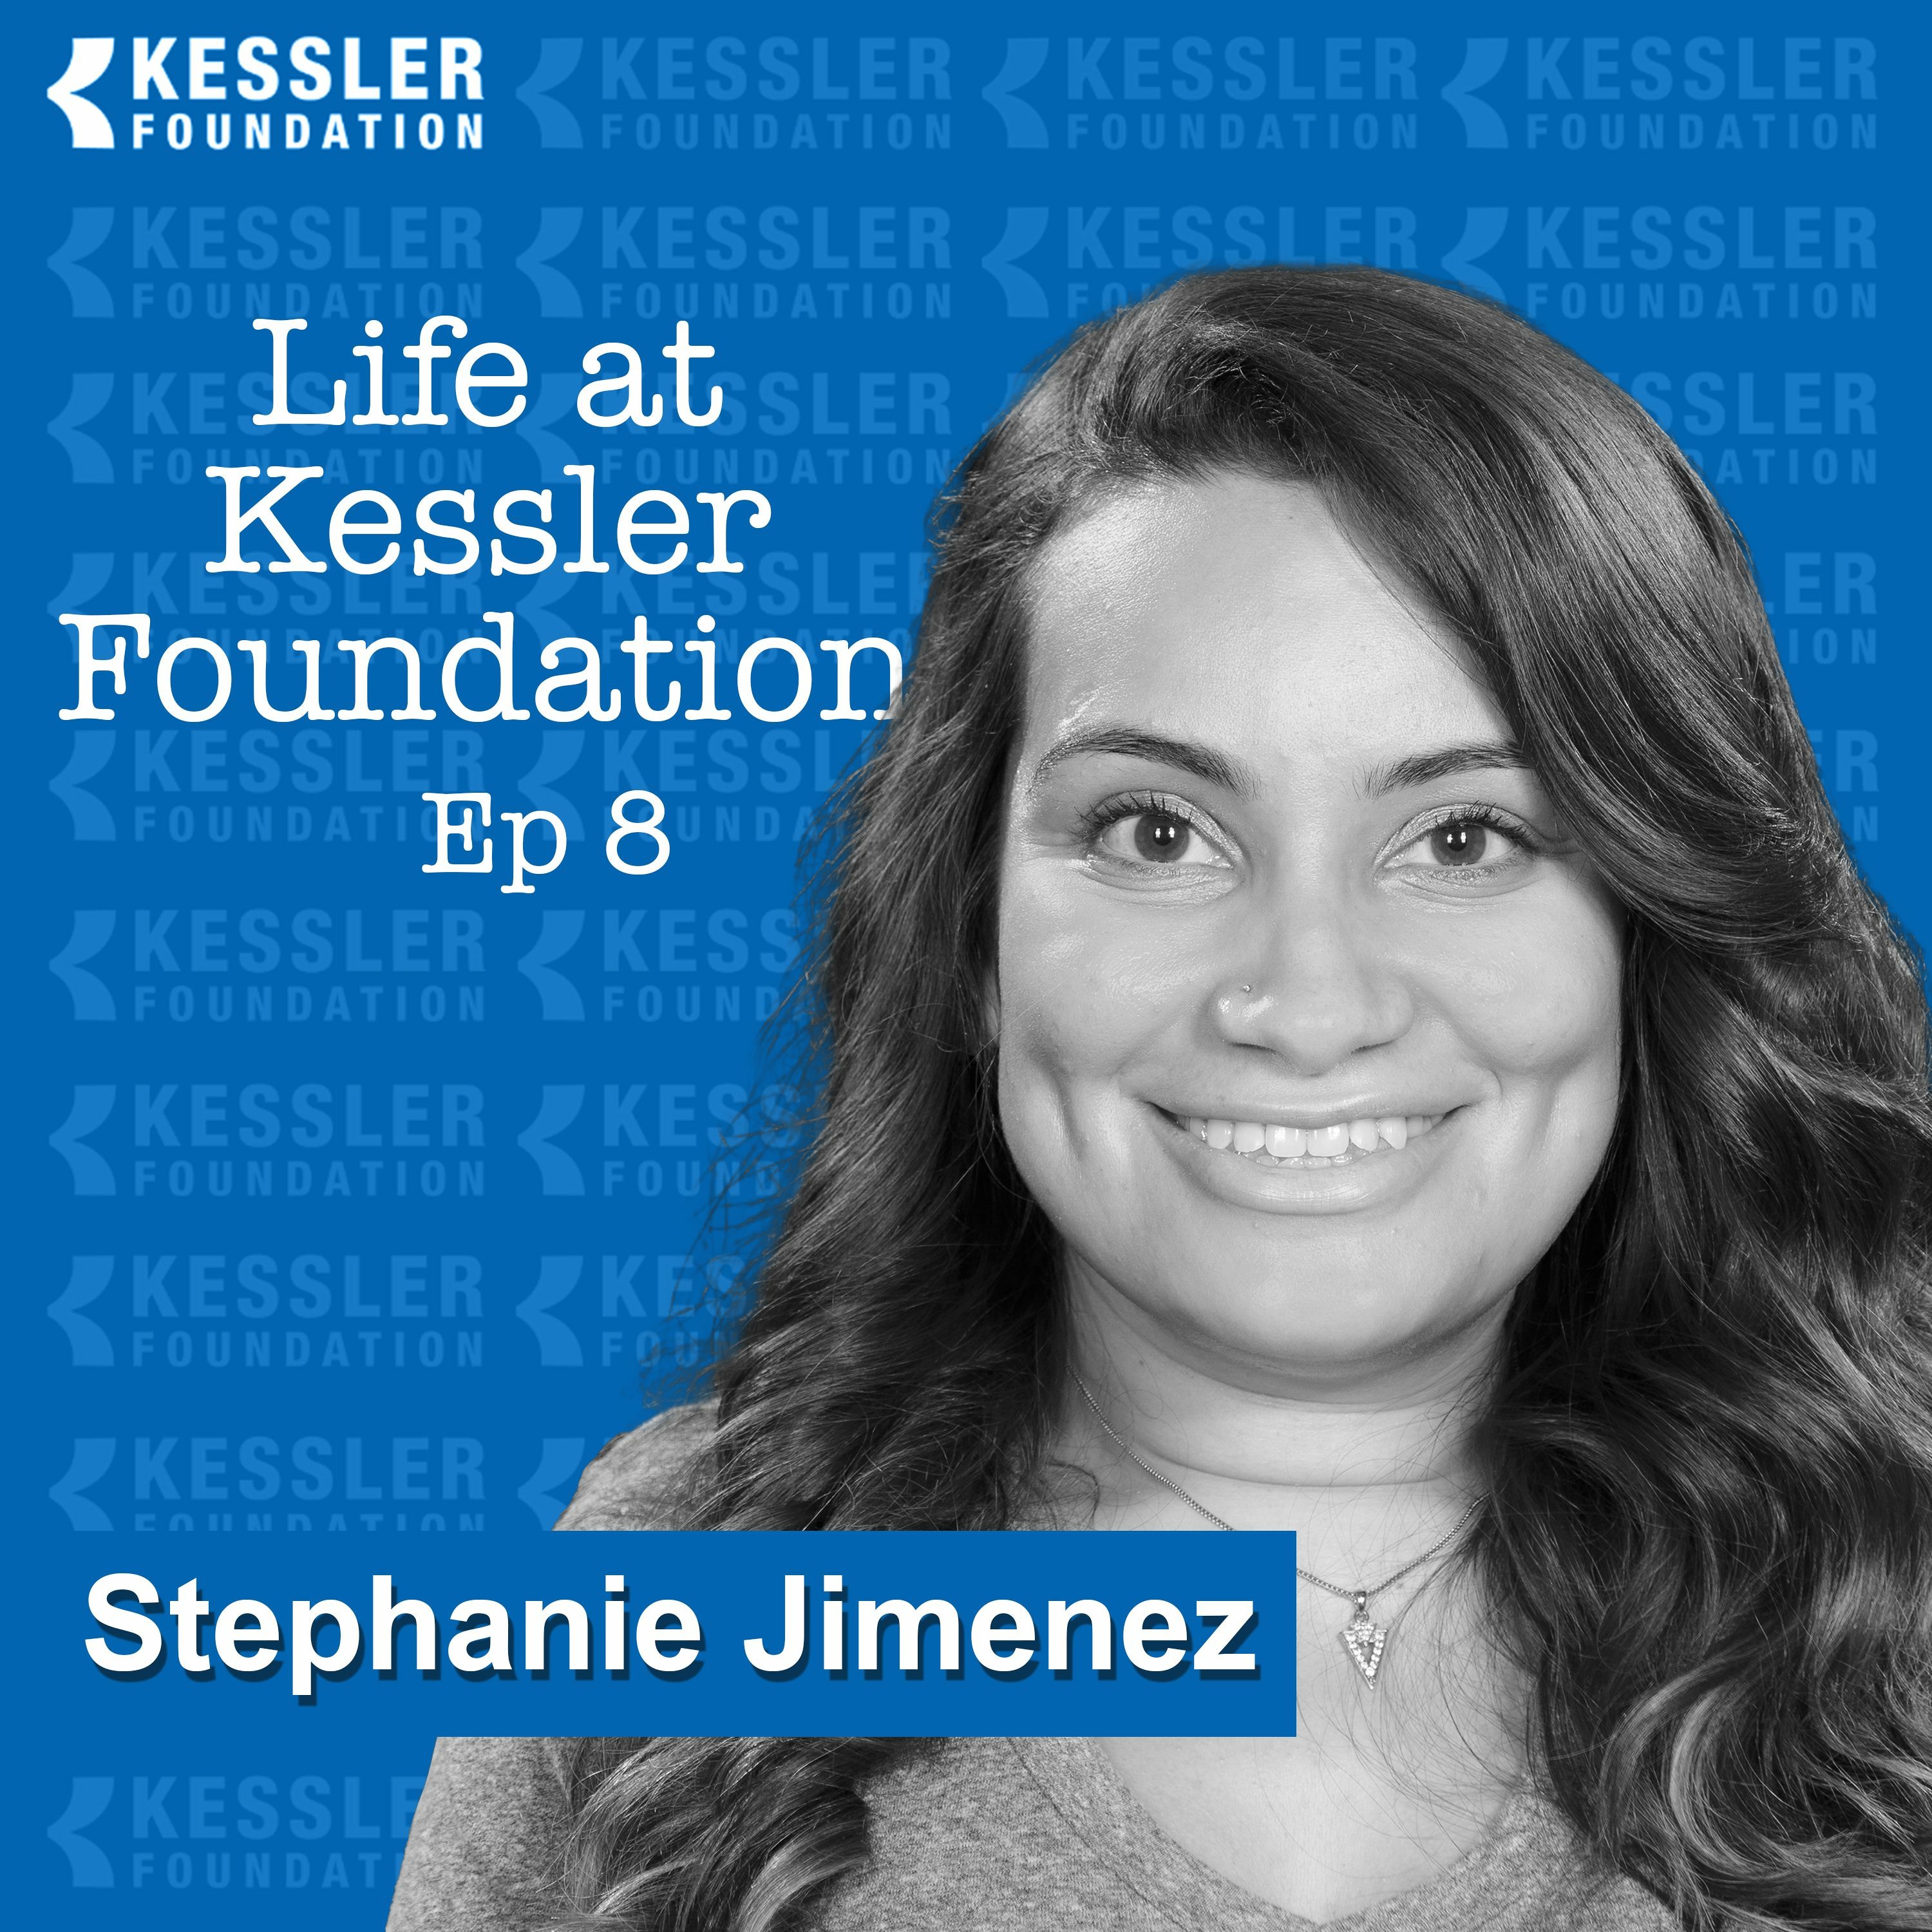 Returning for a New Job, Title, and Responsibilities - Stephanie Jimenez